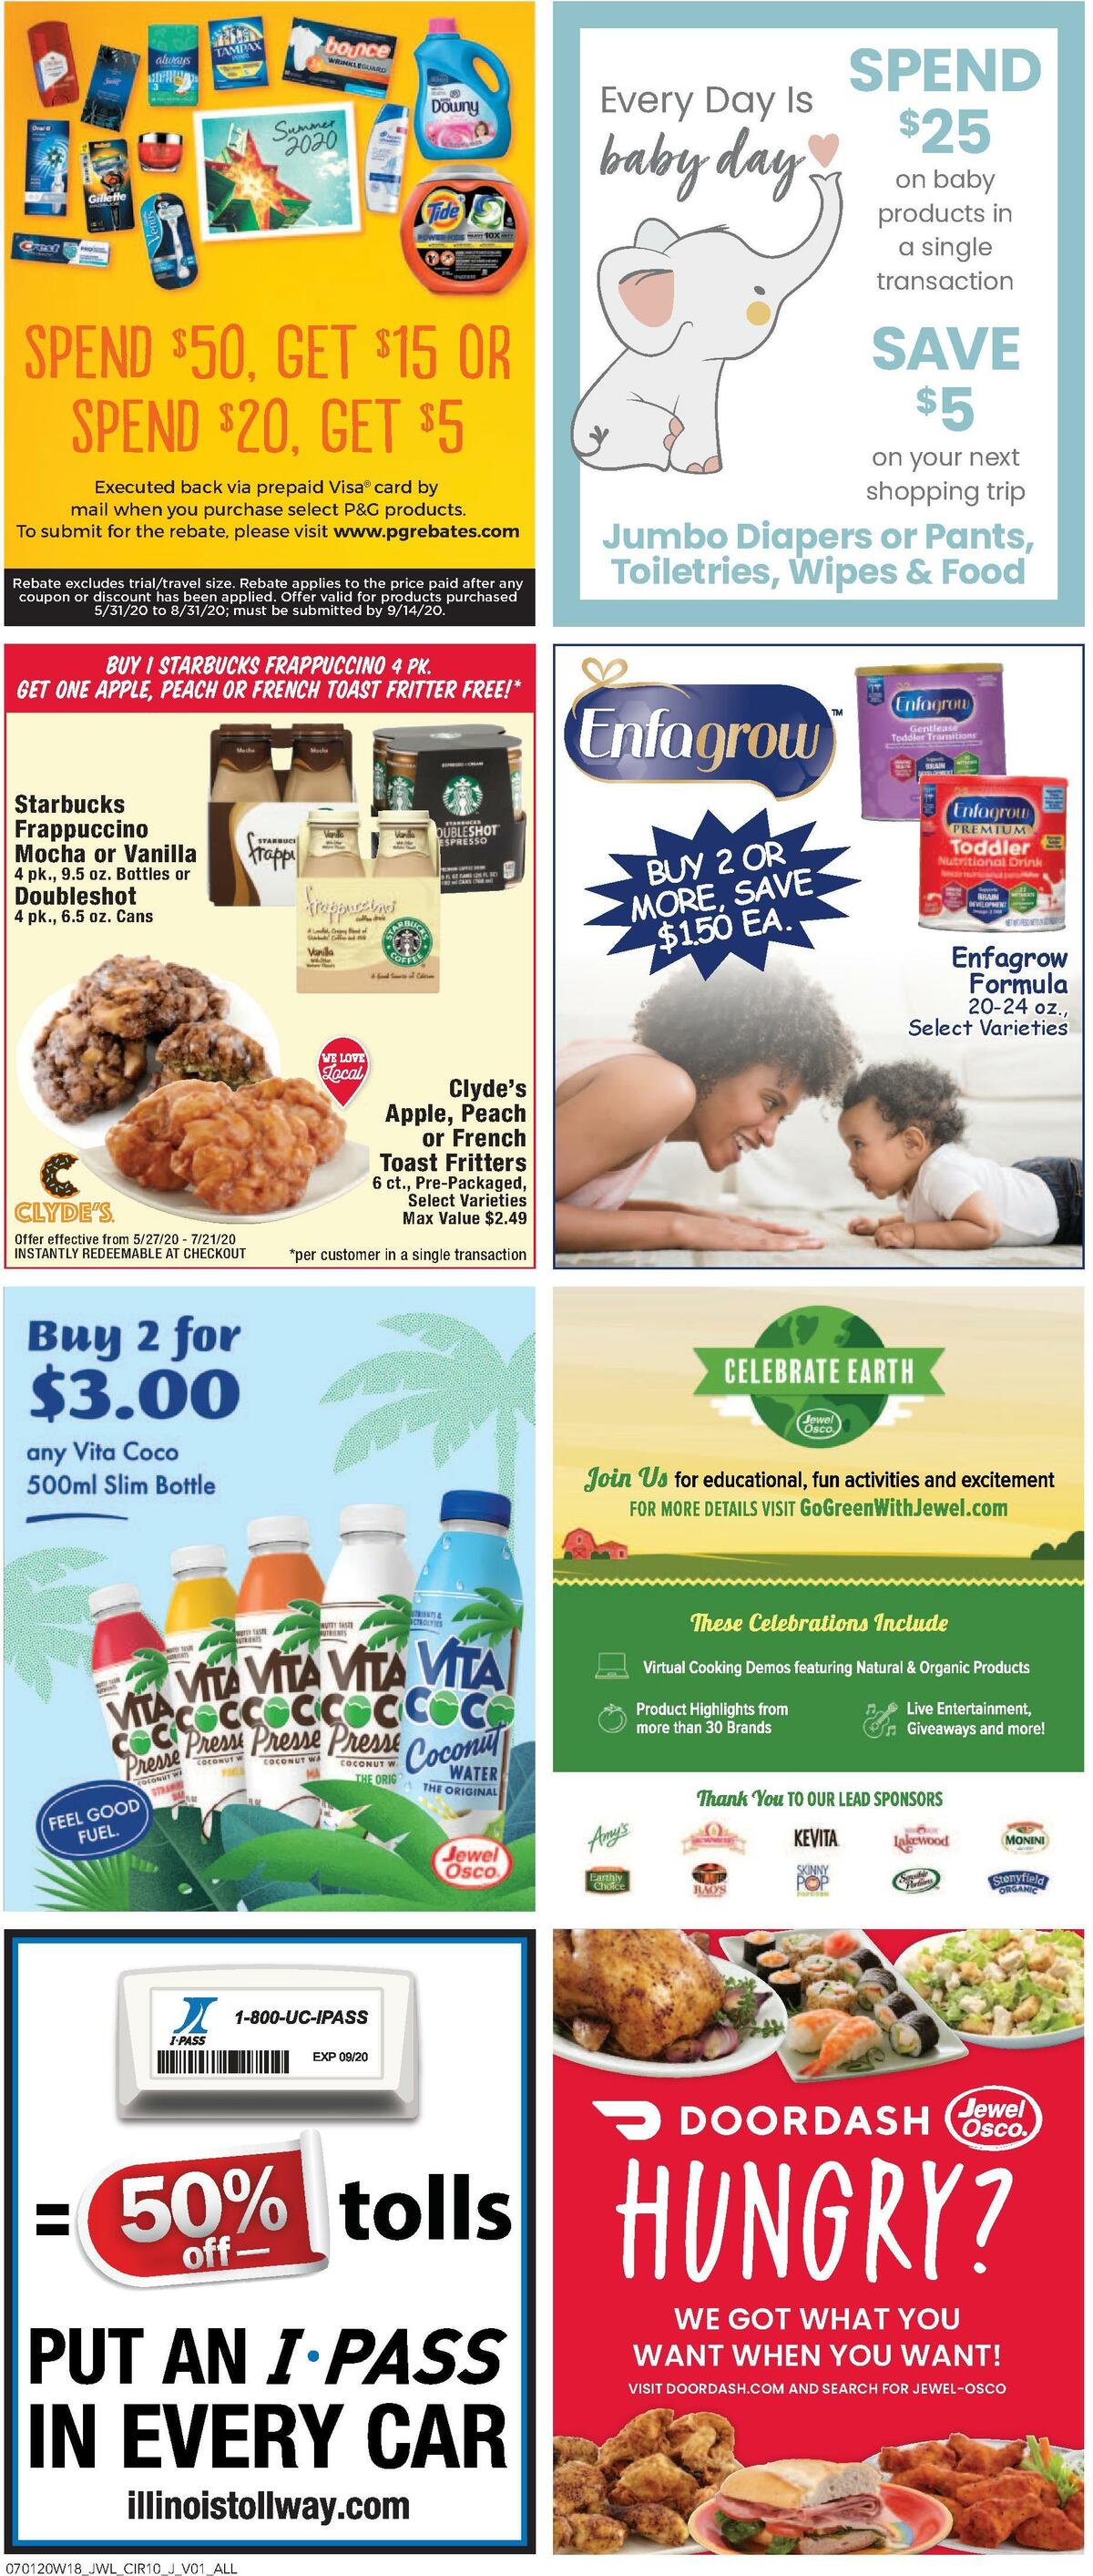 Jewel Osco Weekly Ad from July 1